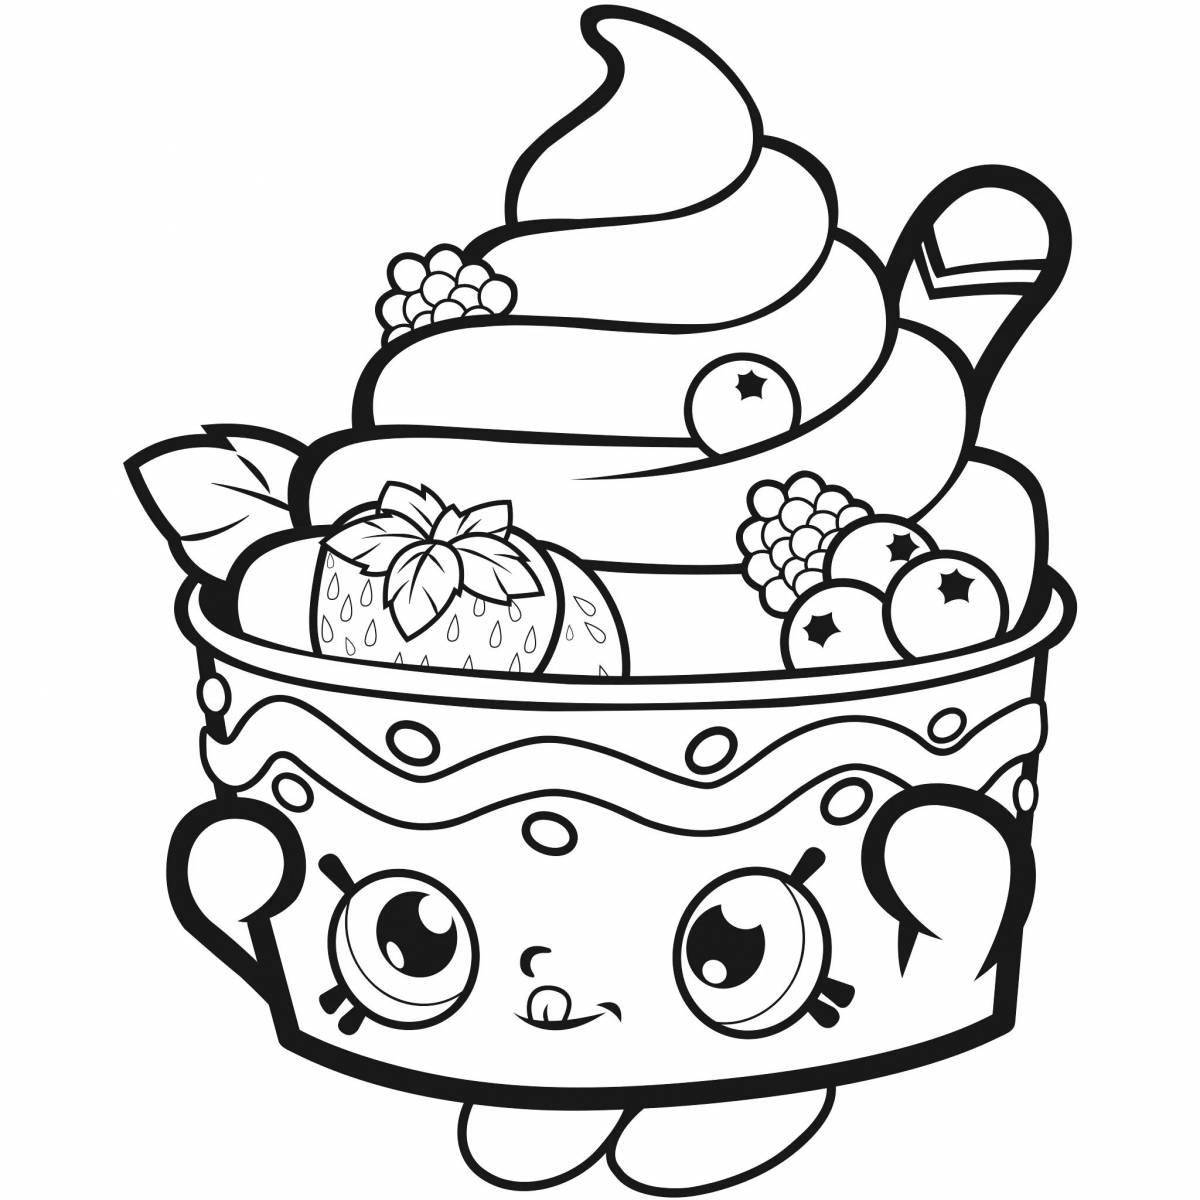 Fancy bakery coloring book